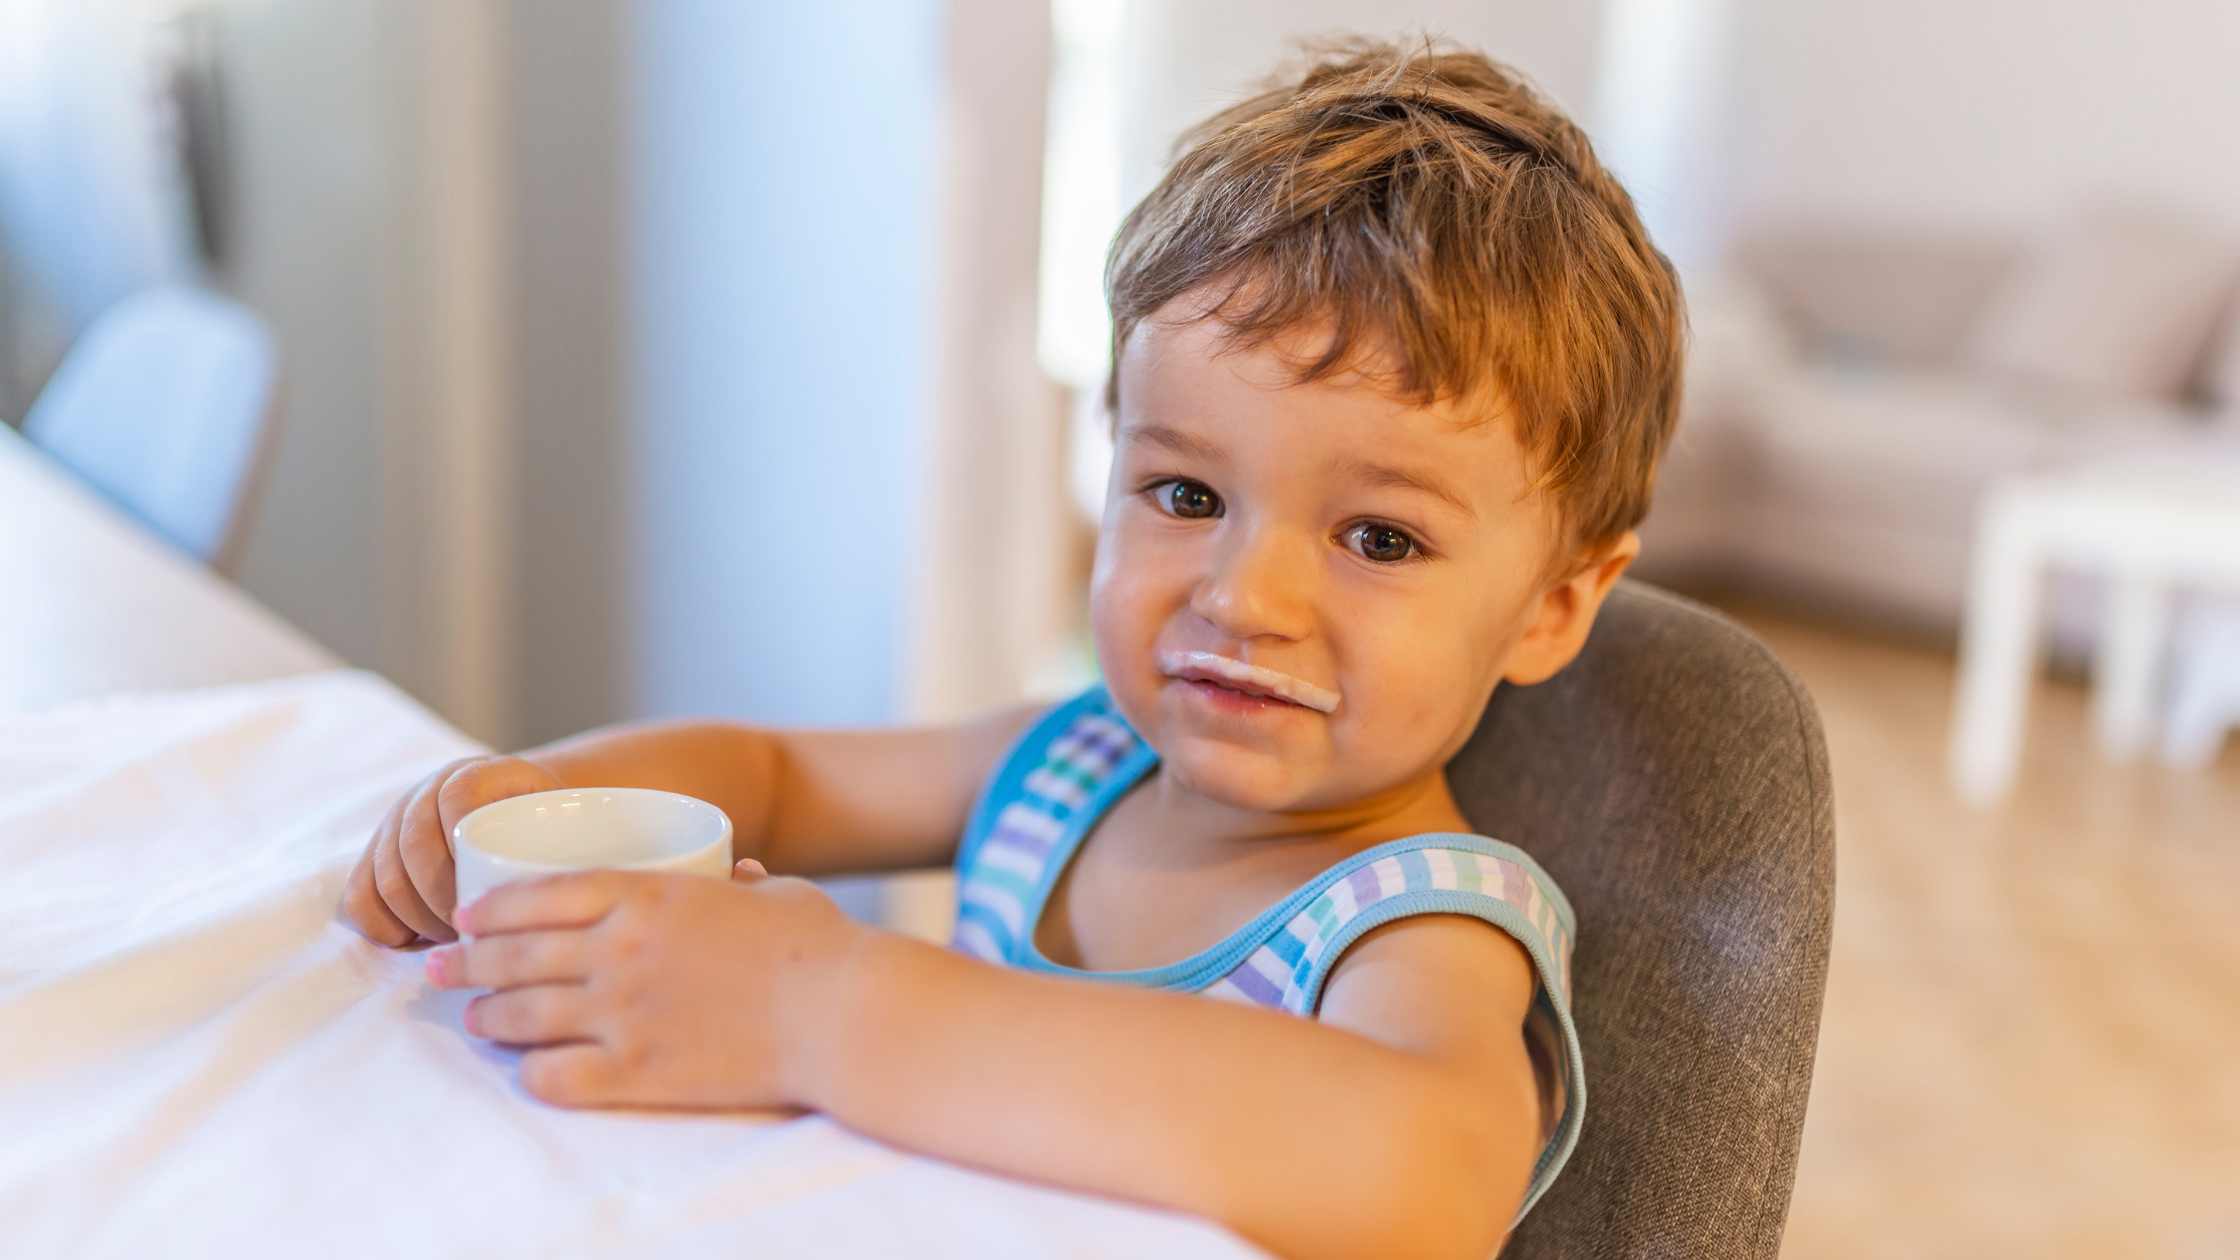 Introducing Cups: When & How to Introduce Them to Your Baby or Toddler